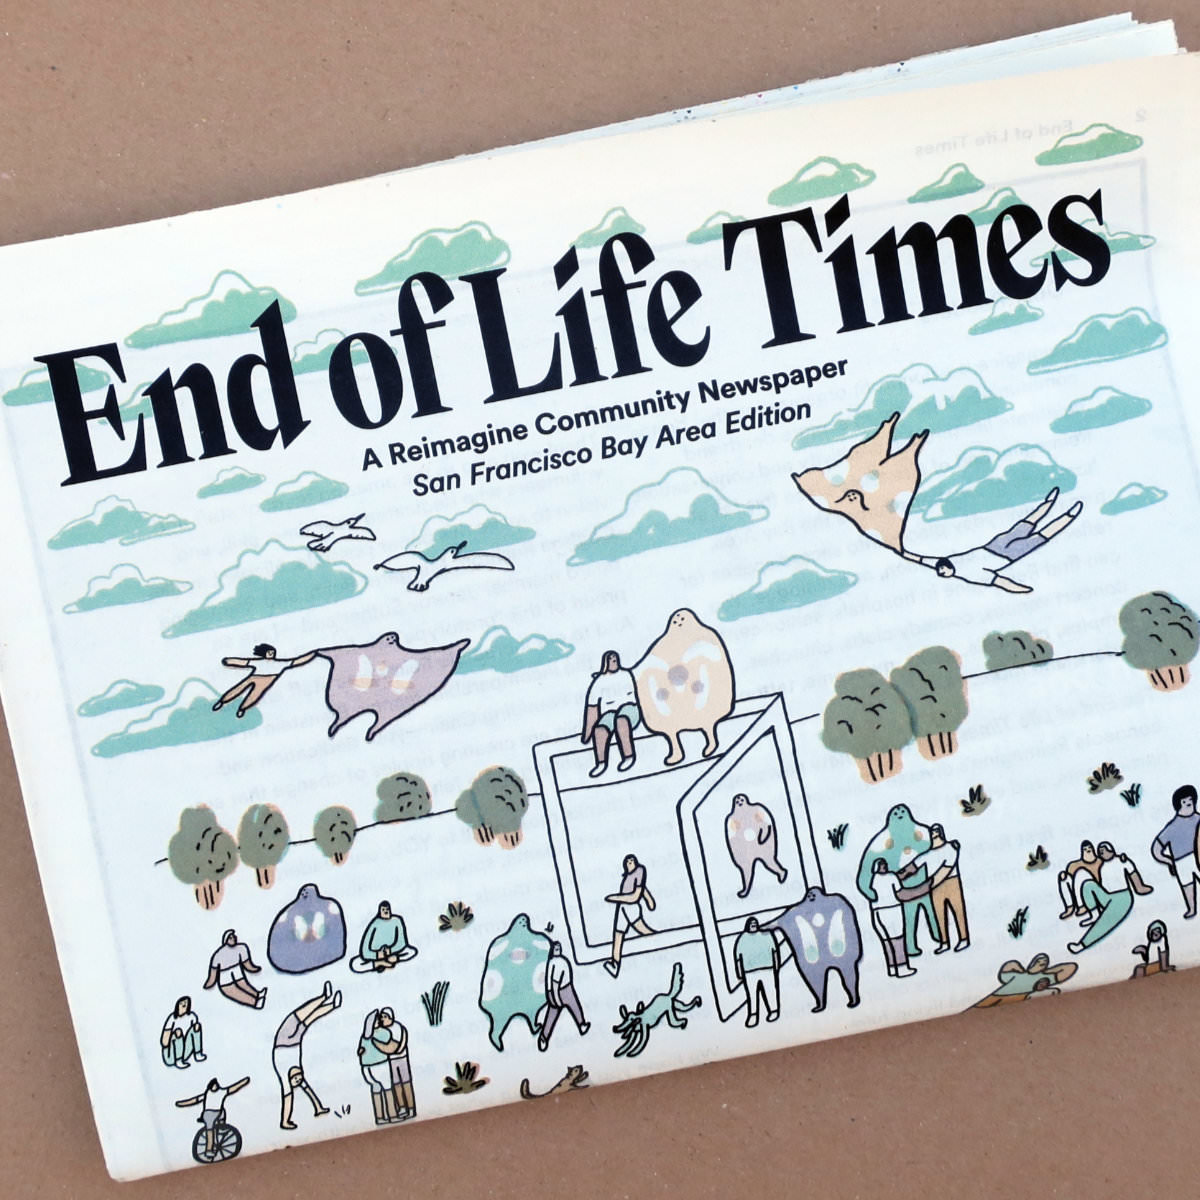 End of Life Times